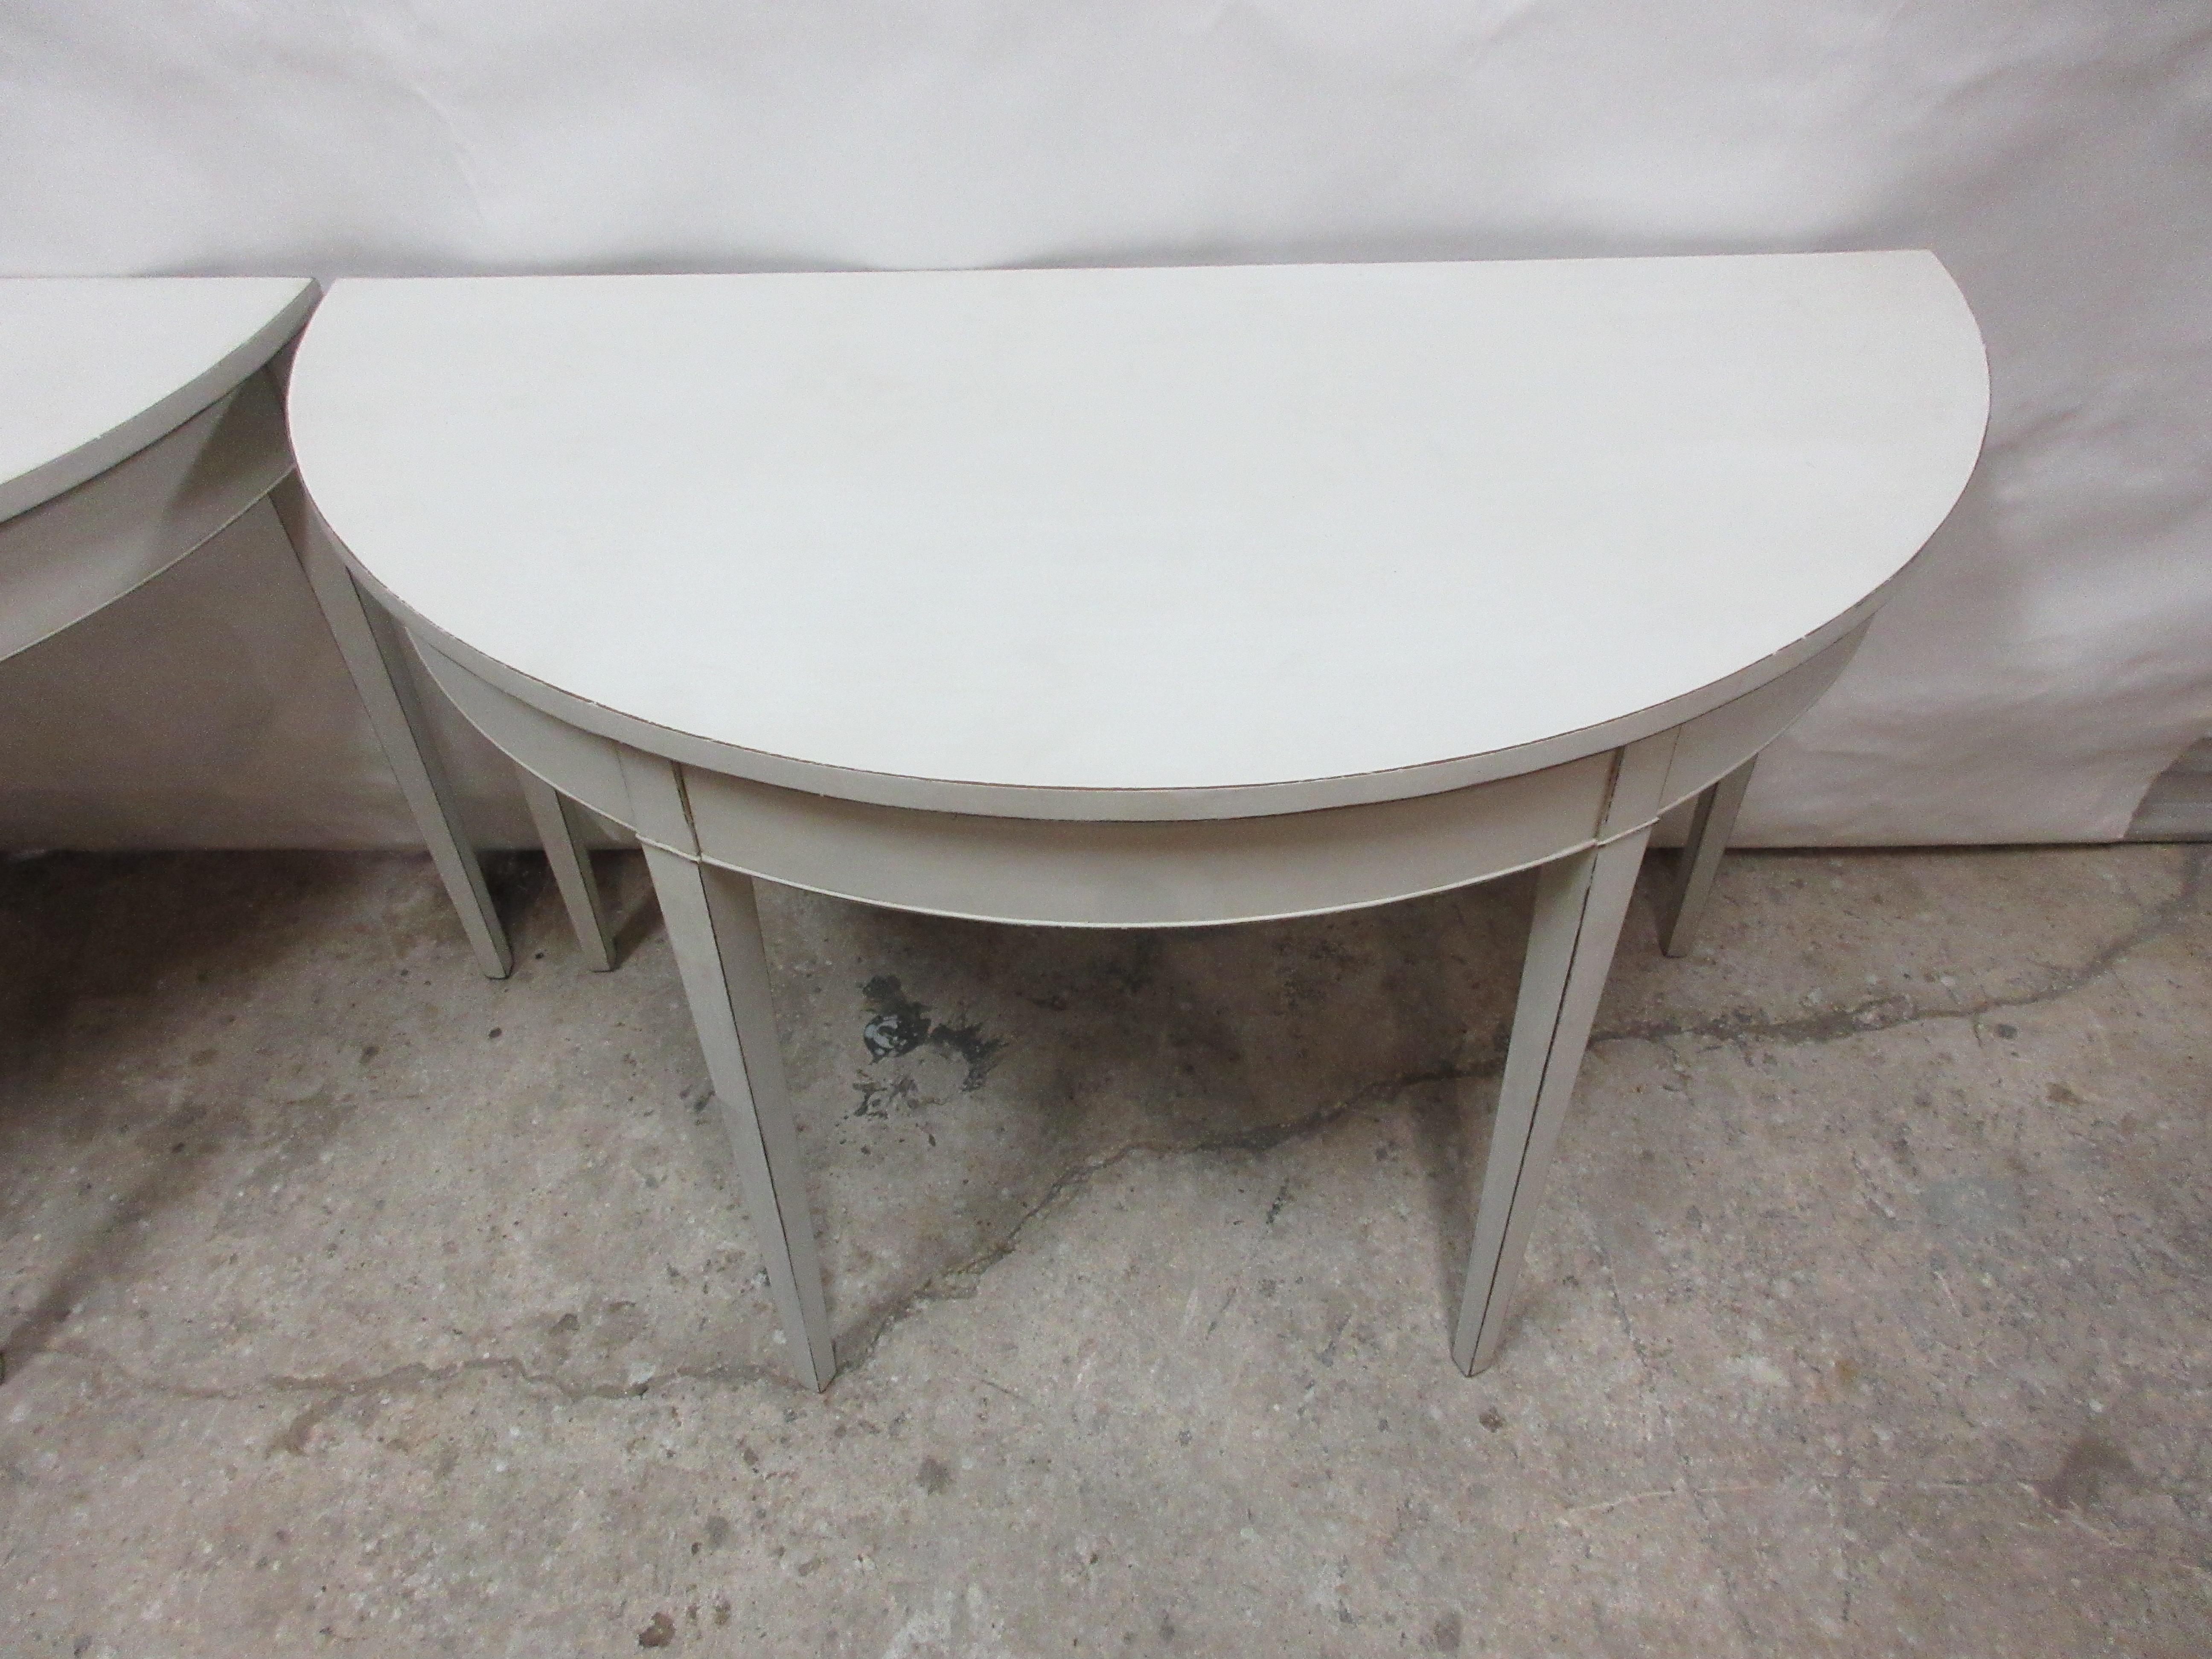 Early 20th Century Gustavian Style 4 Legged Demi-Lune Tables For Sale